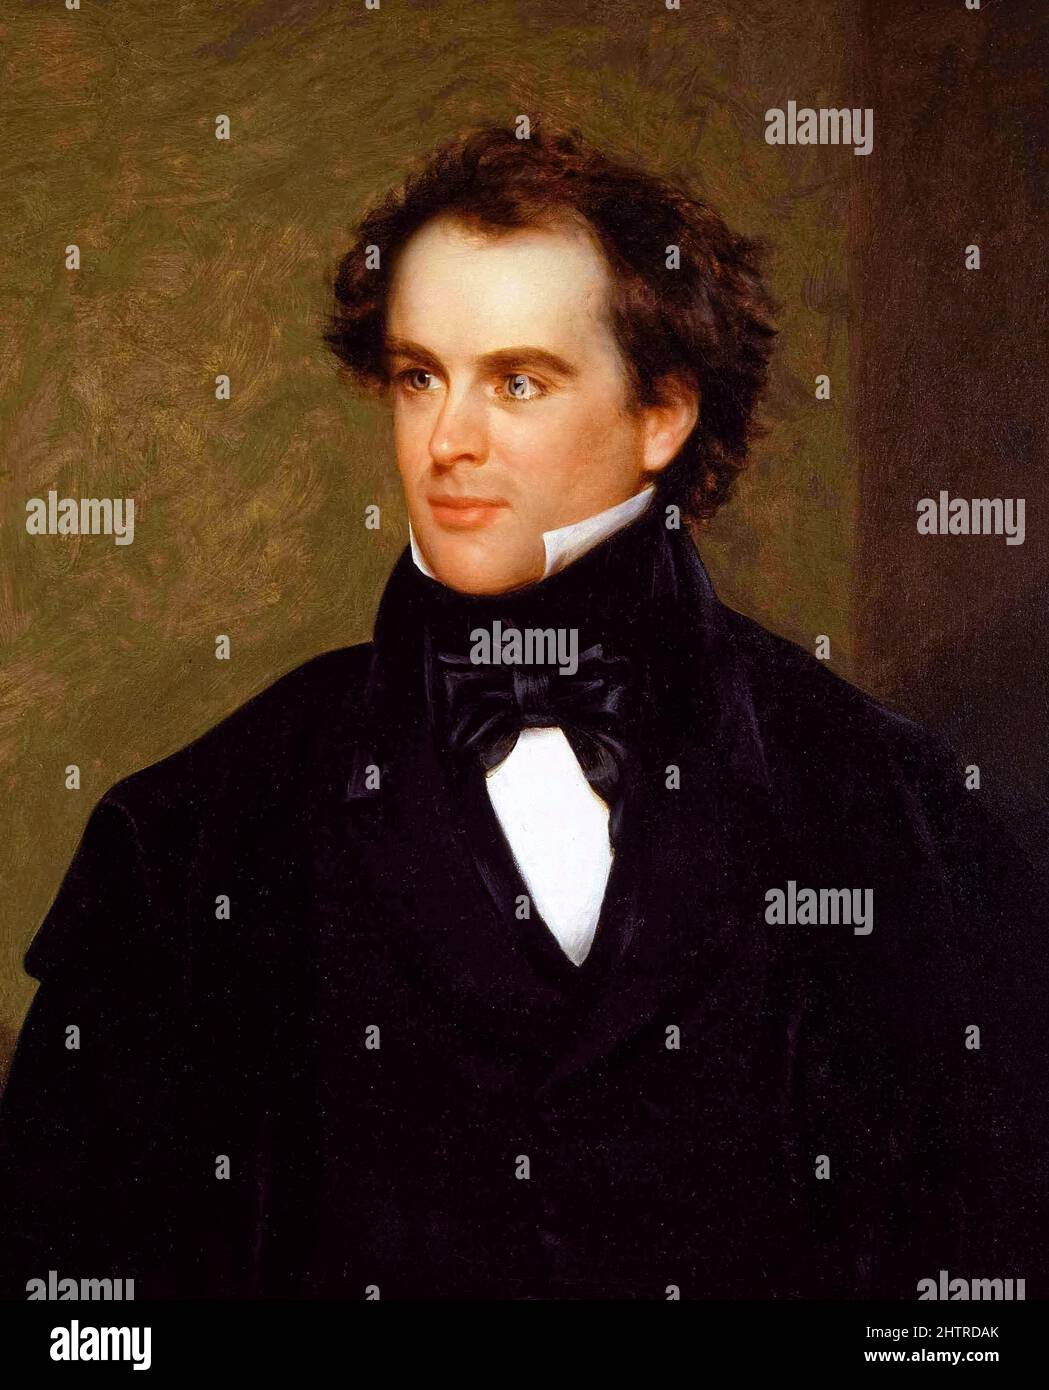 Nathaniel Hawthorne (1804-1864) American writer whose anonymous stories were published in book form in two volumes called Twice-Told Tales in 1837. Photograph of a portrait by Charles Osgood (1809-1890) painted in 1841. Stock Photo